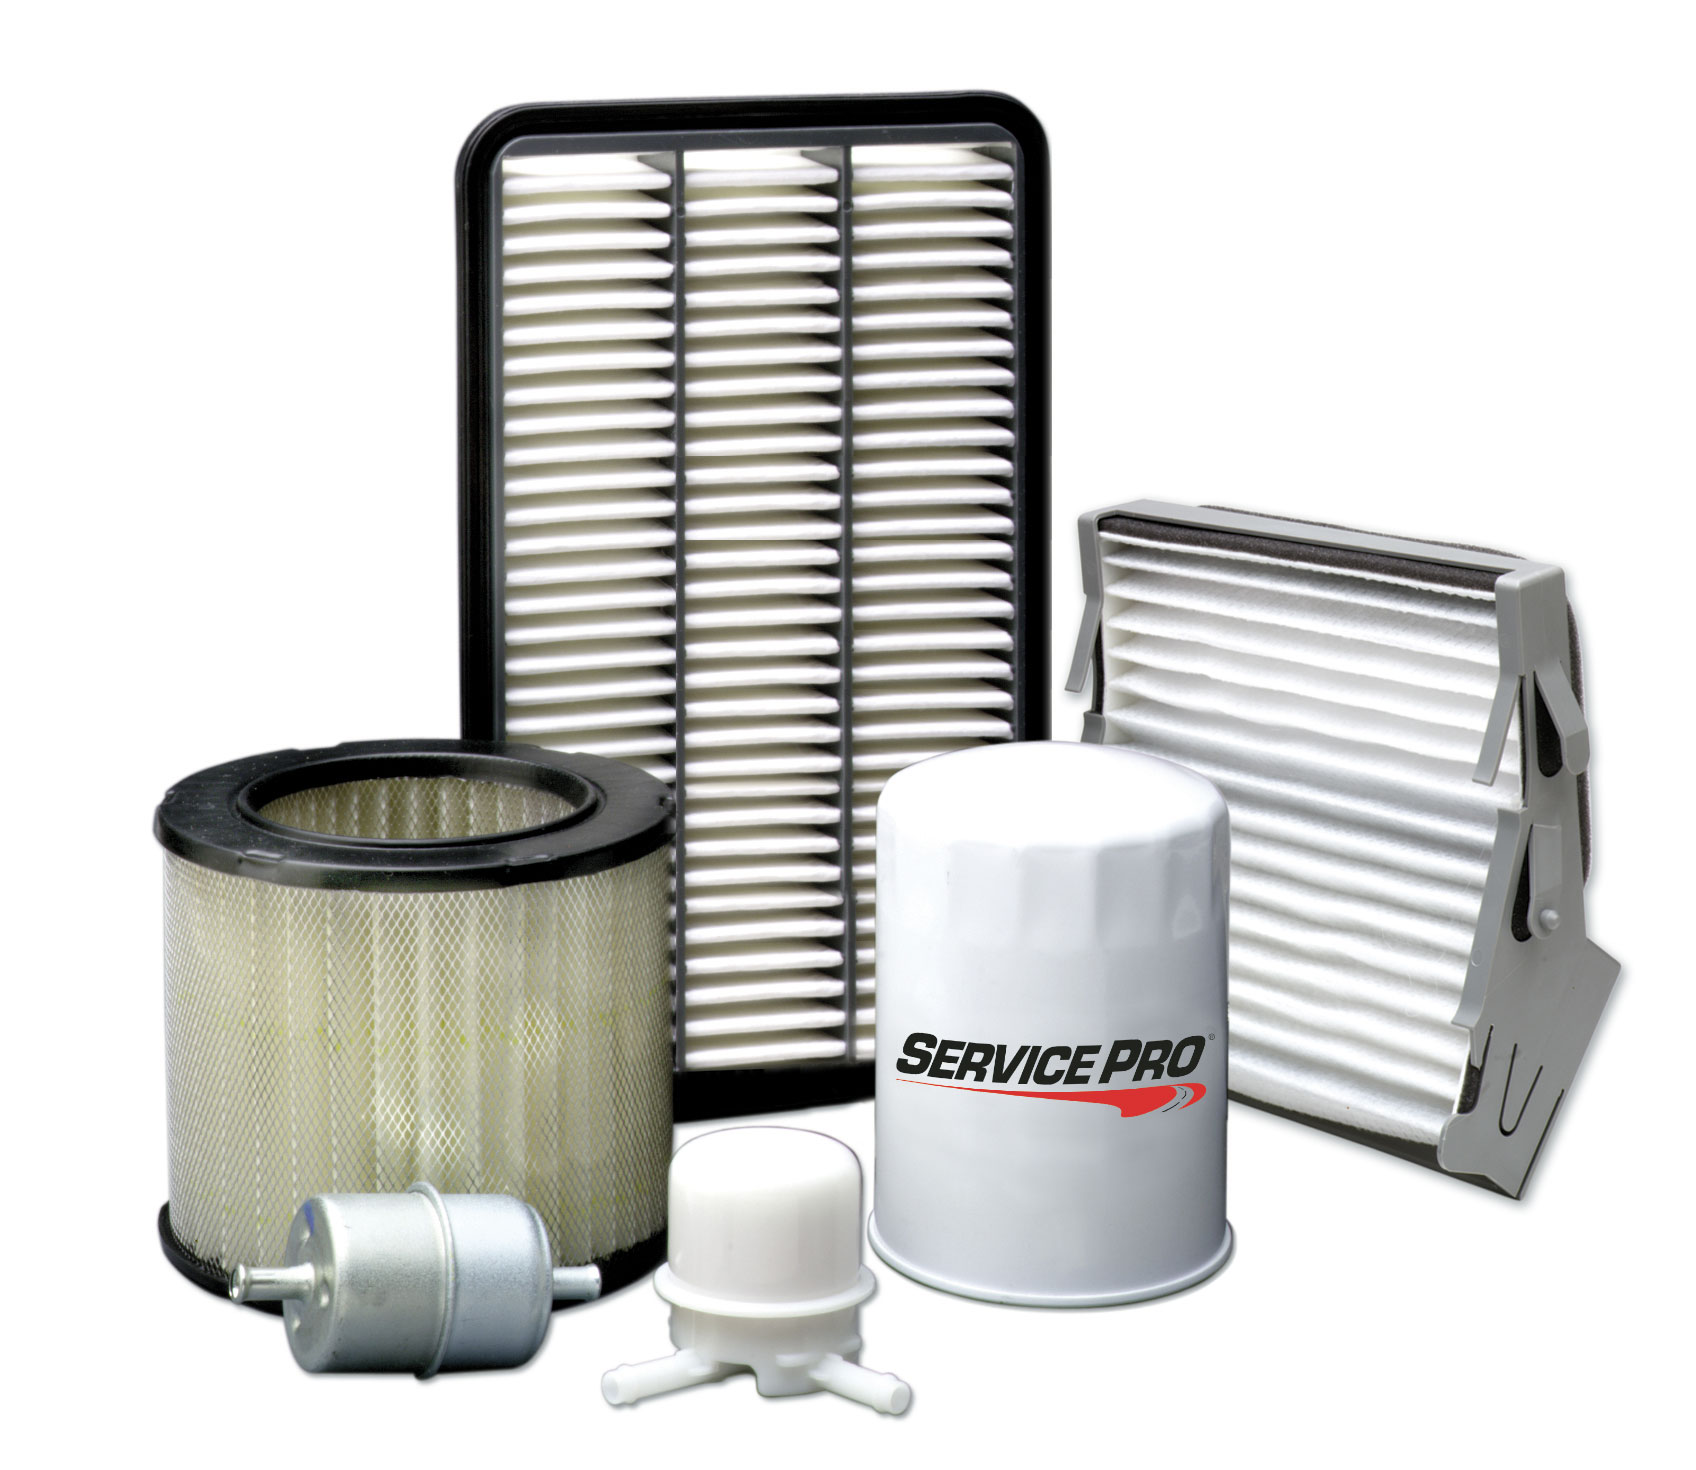 FILTER-OIL #E8113 SVC PRO 
EXTENDED PROTECTION